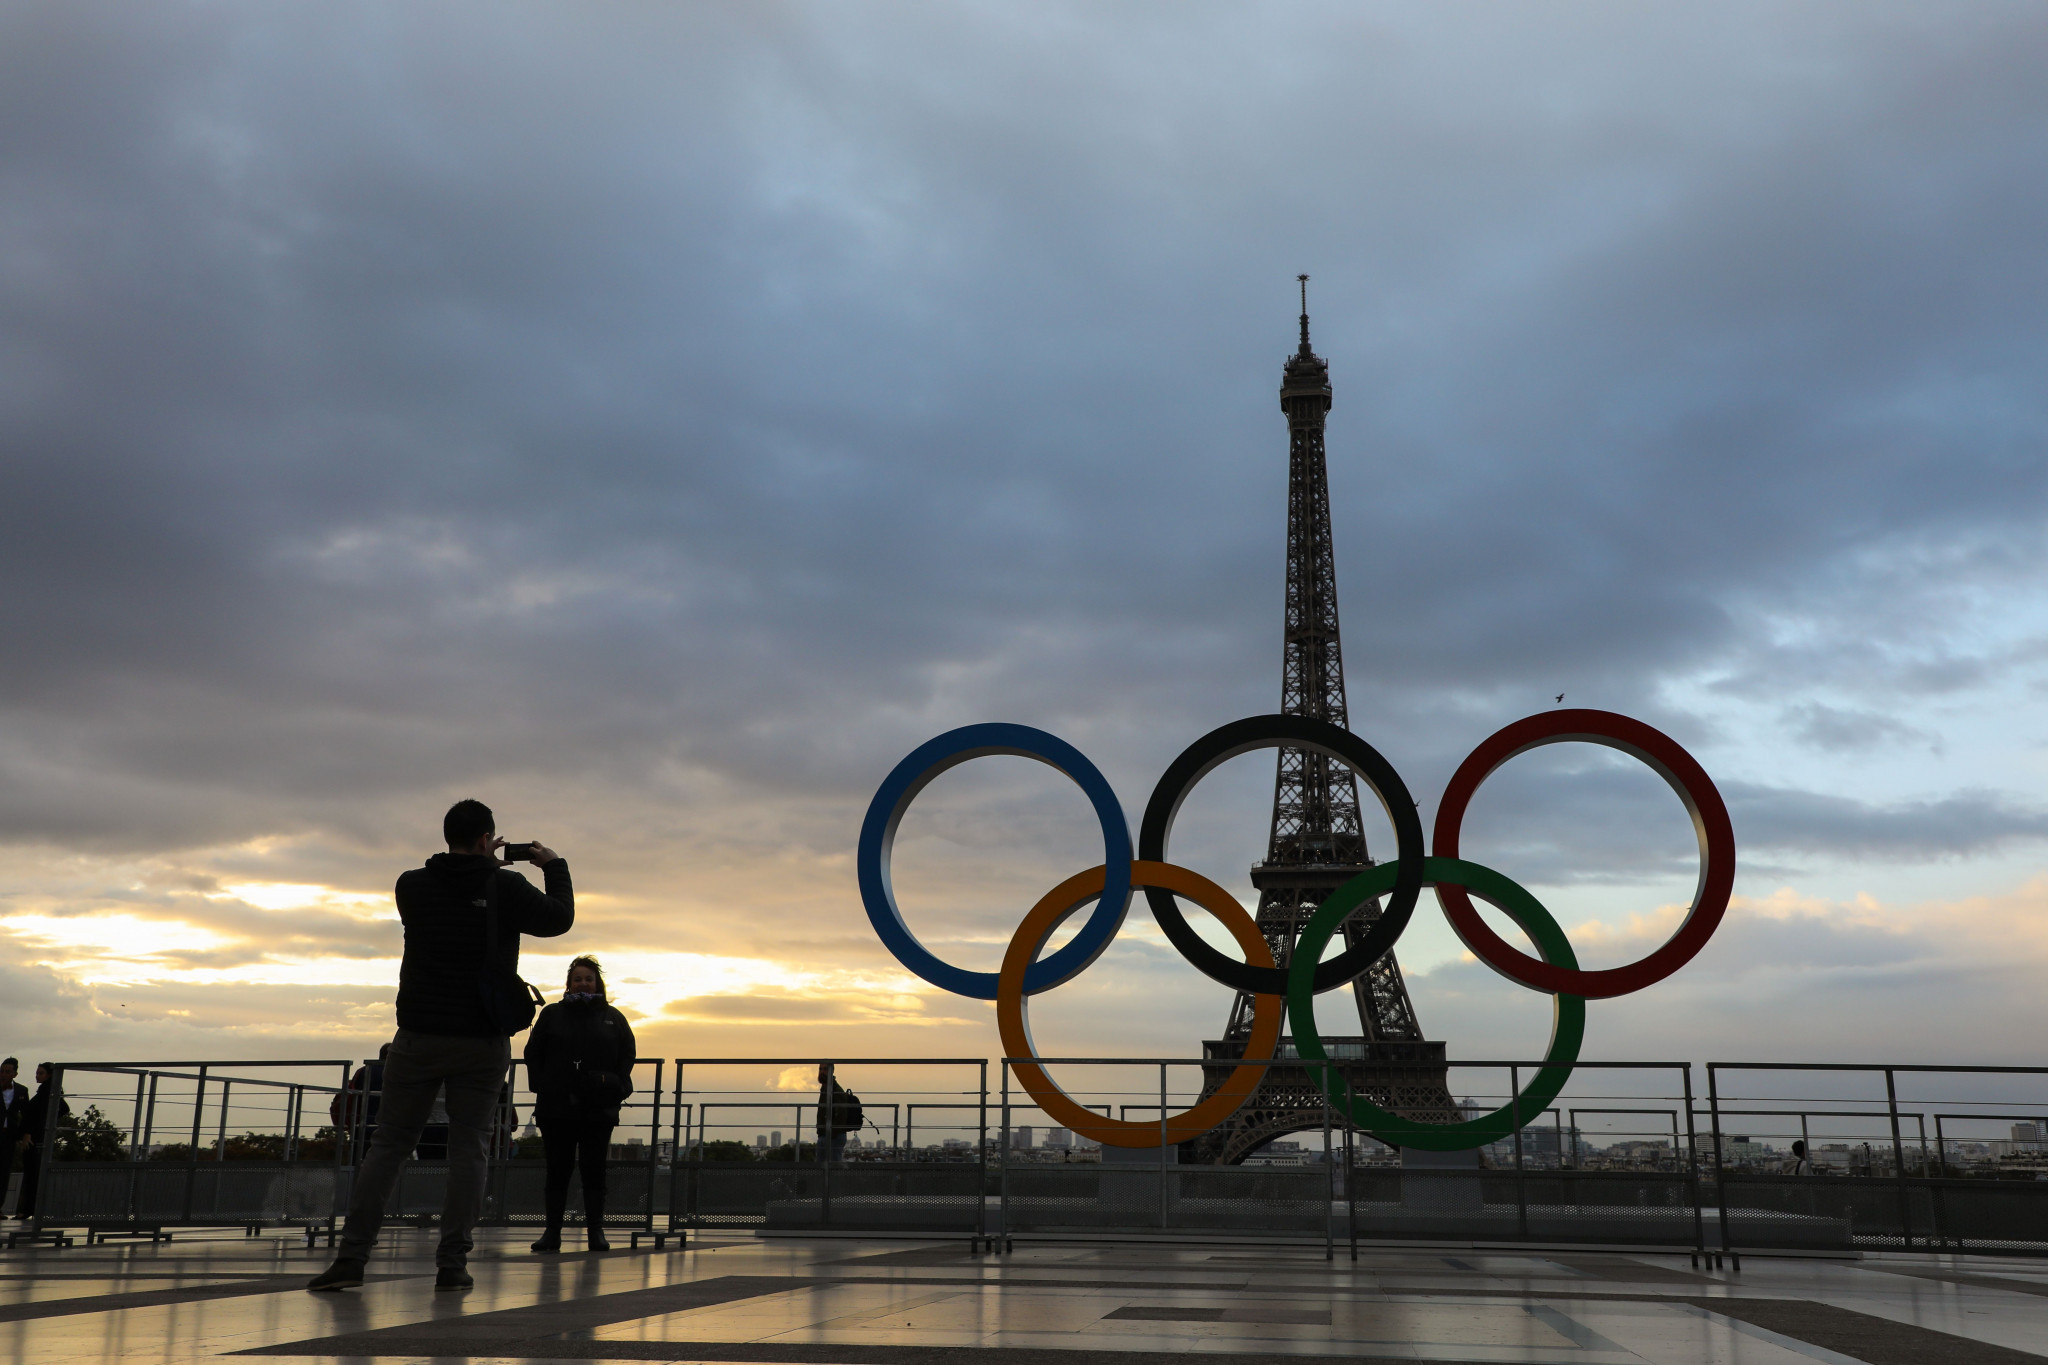 A survey of 1,005 French people showed 72 per cent favour Russian athletes' participation at Paris 2024 ©Getty Images